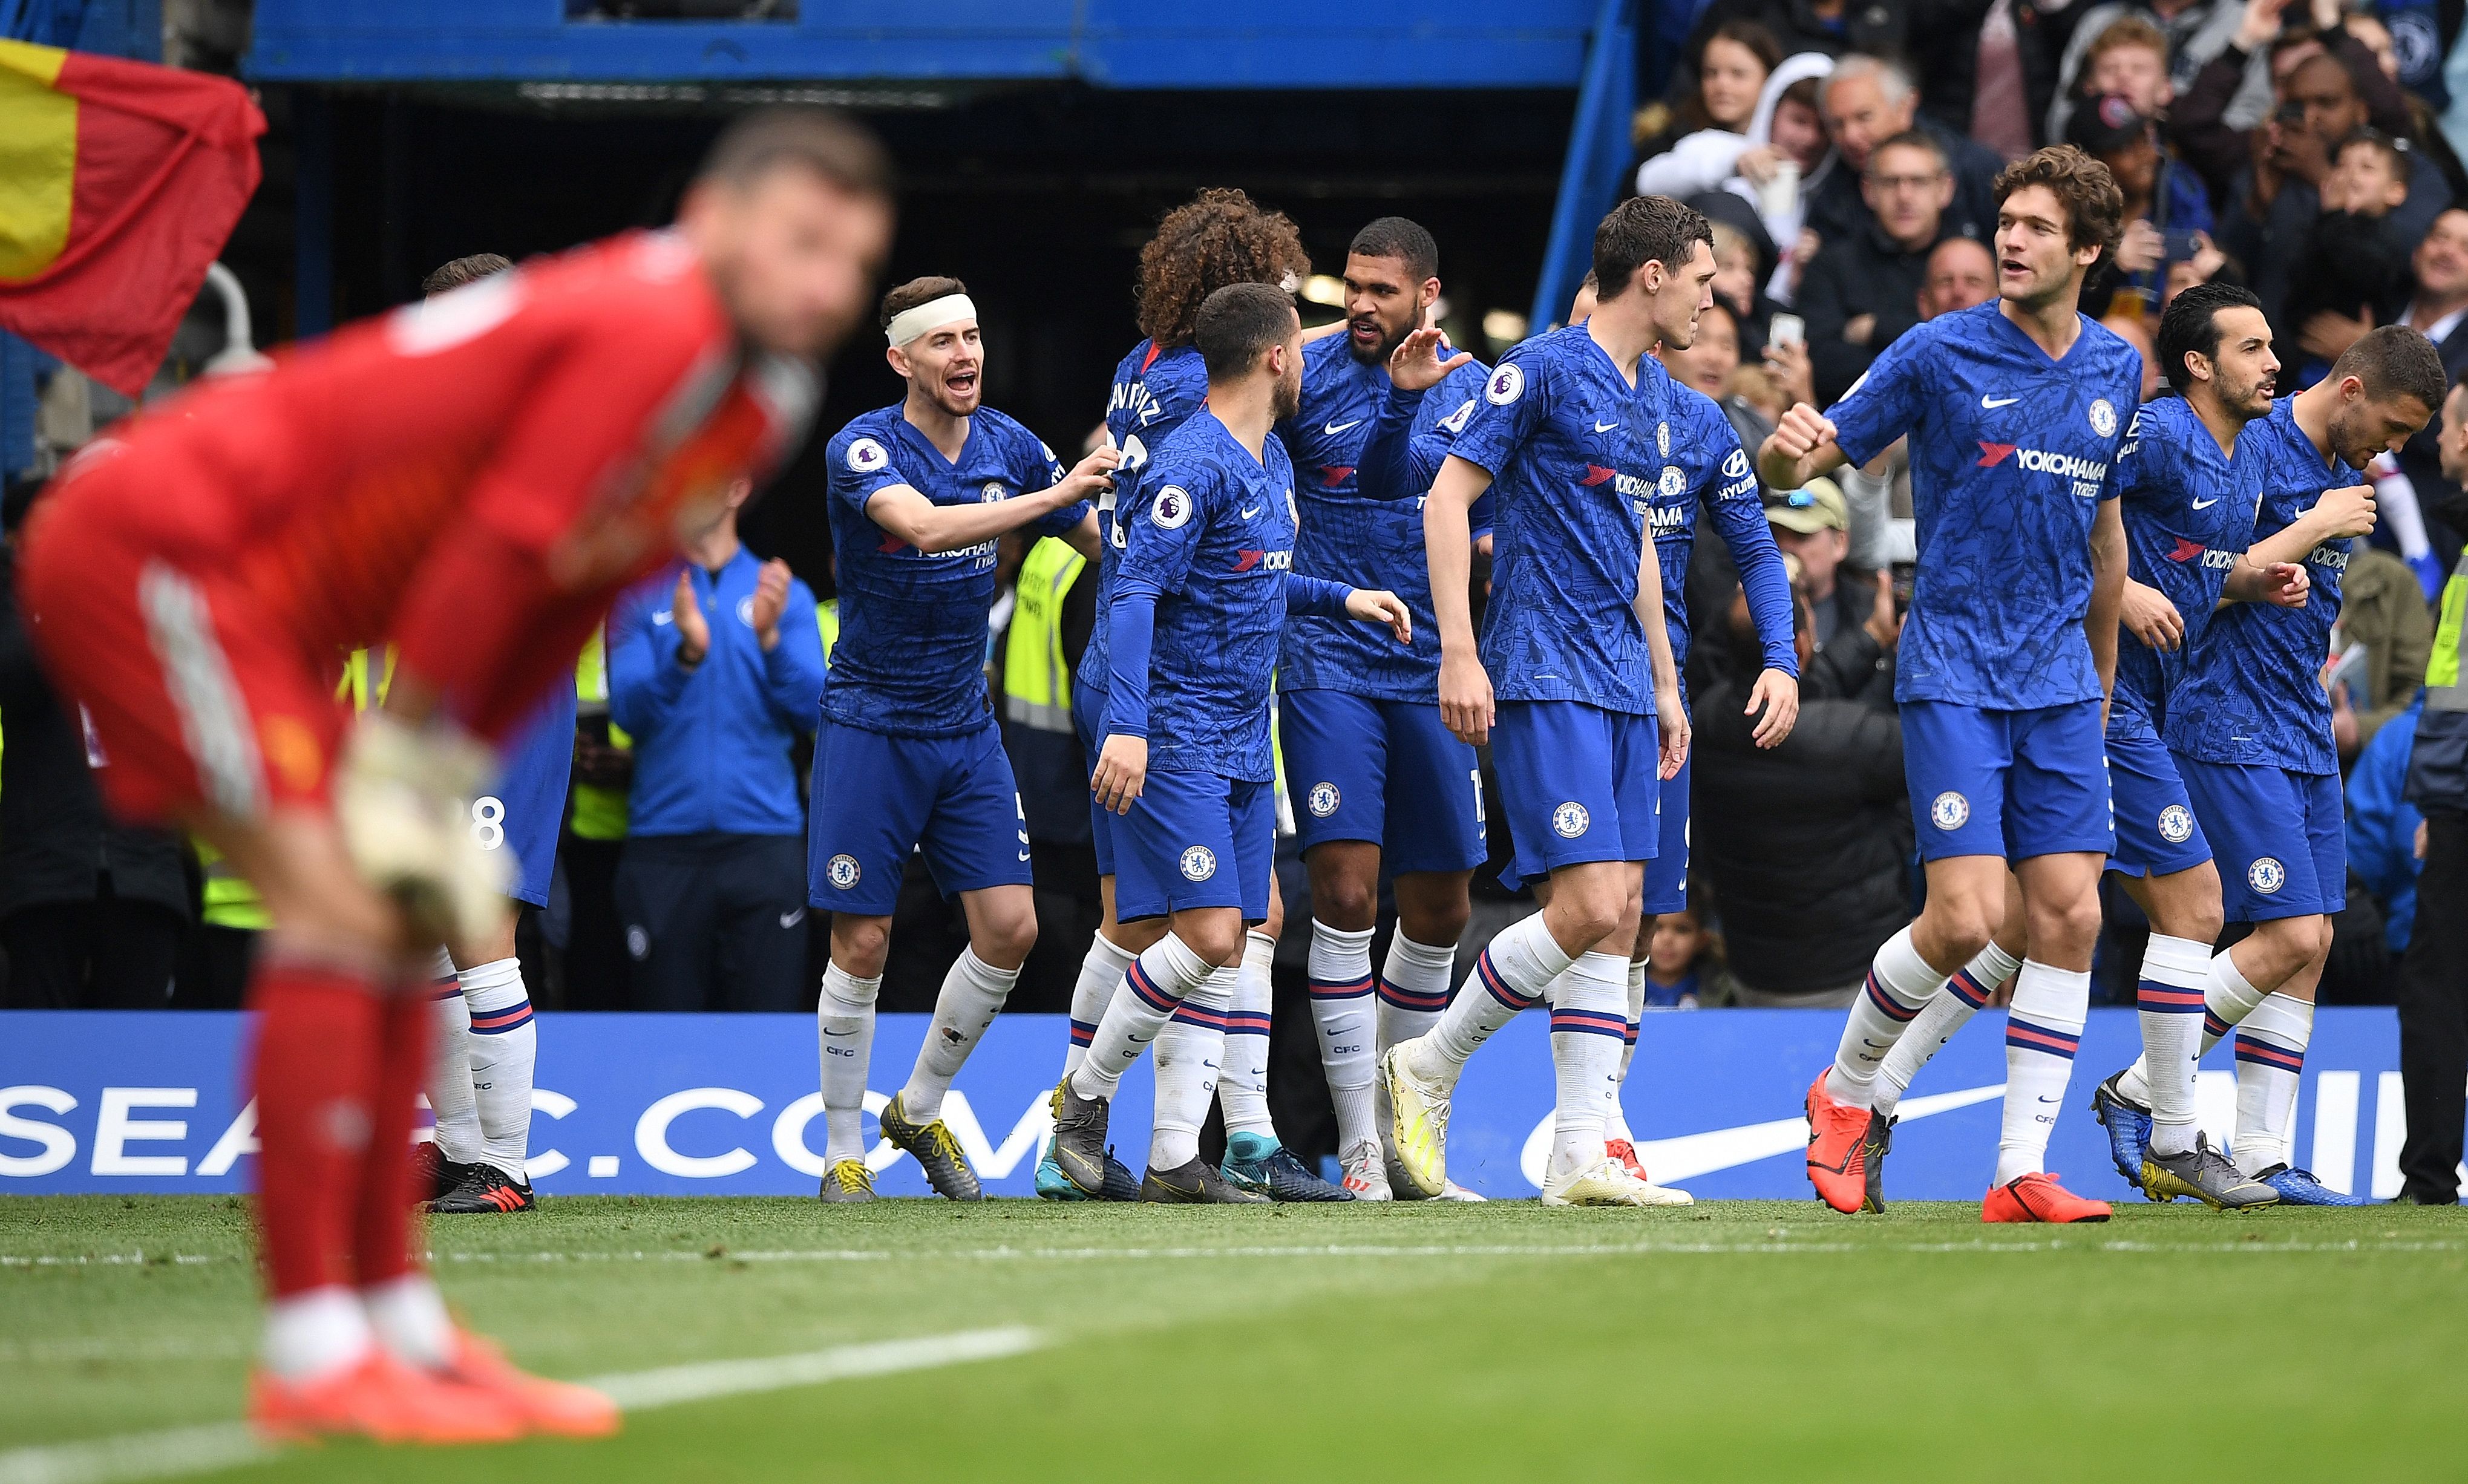 Chelsea's English midfielder Ruben Loftus-Cheek (C) celebrates scoring the opening goal during the English Premier League football match between Chelsea and Watford at Stamford Bridge in London on May 5, 2019. (Photo by Daniel LEAL-OLIVAS / AFP) / RESTRICTED TO EDITORIAL USE. No use with unauthorized audio, video, data, fixture lists, club/league logos or 'live' services. Online in-match use limited to 120 images. An additional 40 images may be used in extra time. No video emulation. Social media in-match use limited to 120 images. An additional 40 images may be used in extra time. No use in betting publications, games or single club/league/player publications. /         (Photo credit should read DANIEL LEAL-OLIVAS/AFP/Getty Images)